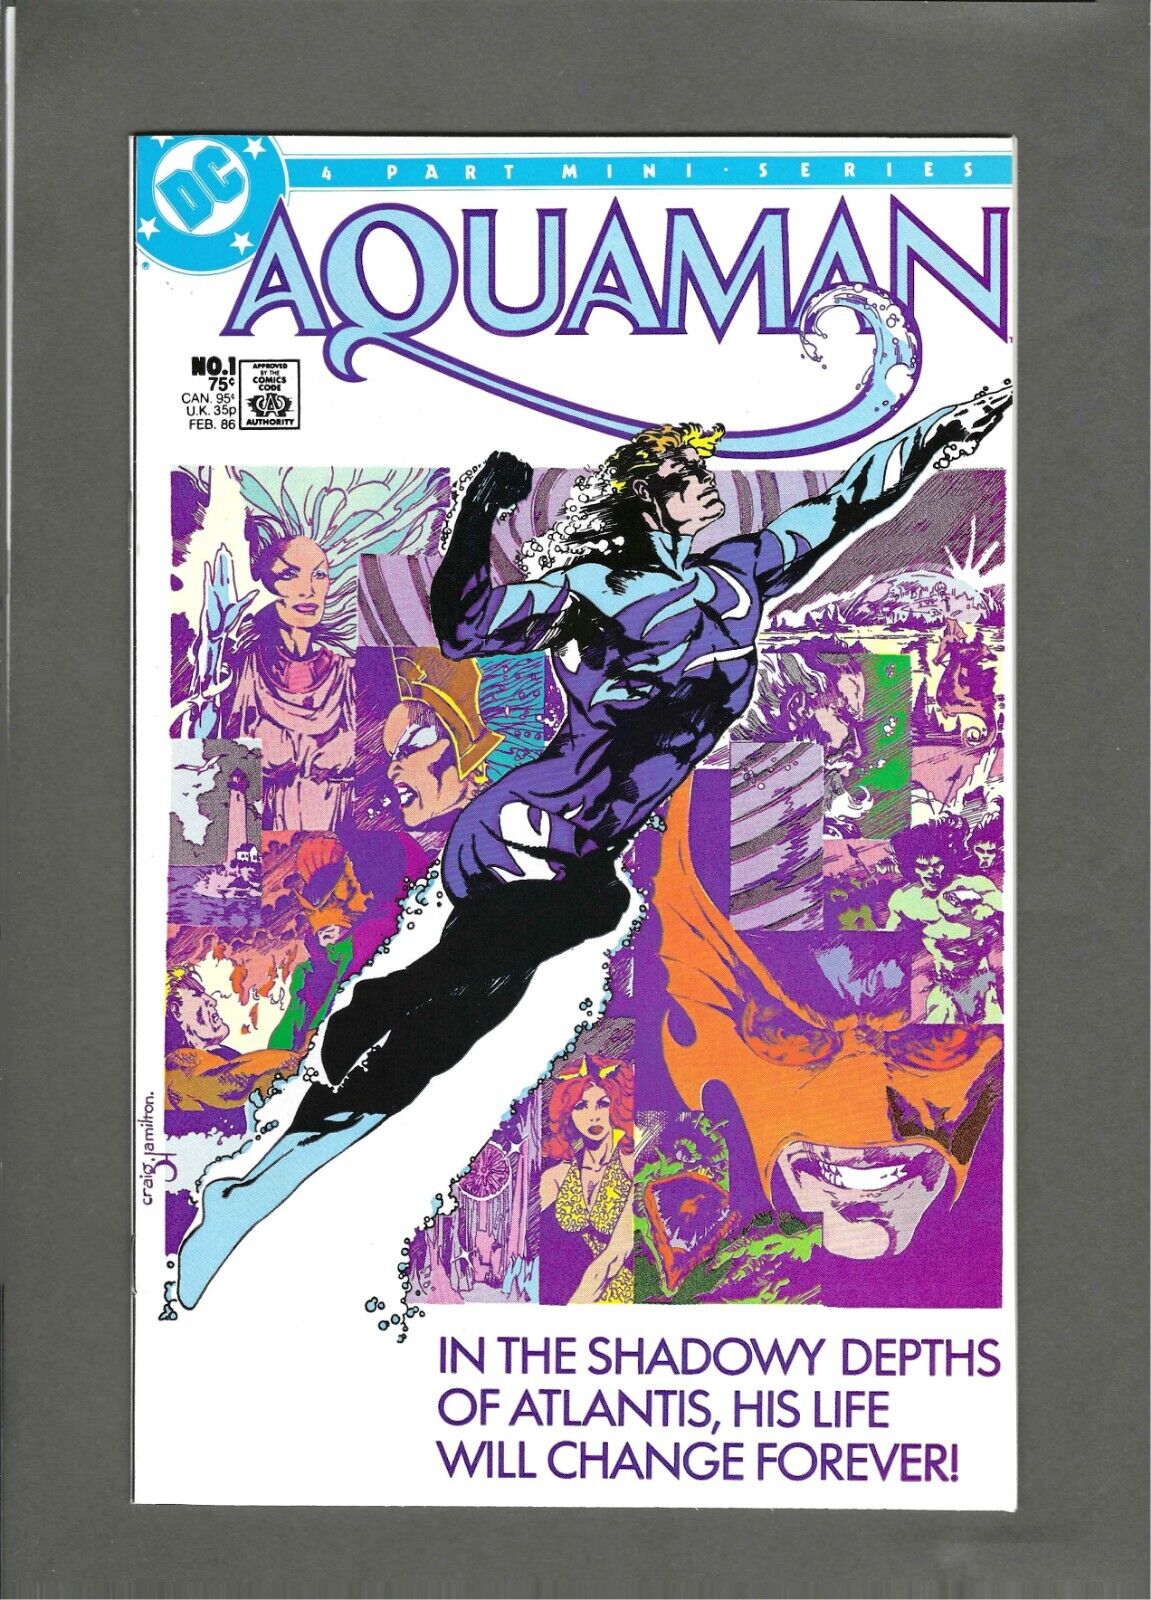 Aquaman #1: Dry Cleaned: Pressed: Scanned: Bagged: Boarded: NM/MT 9.8